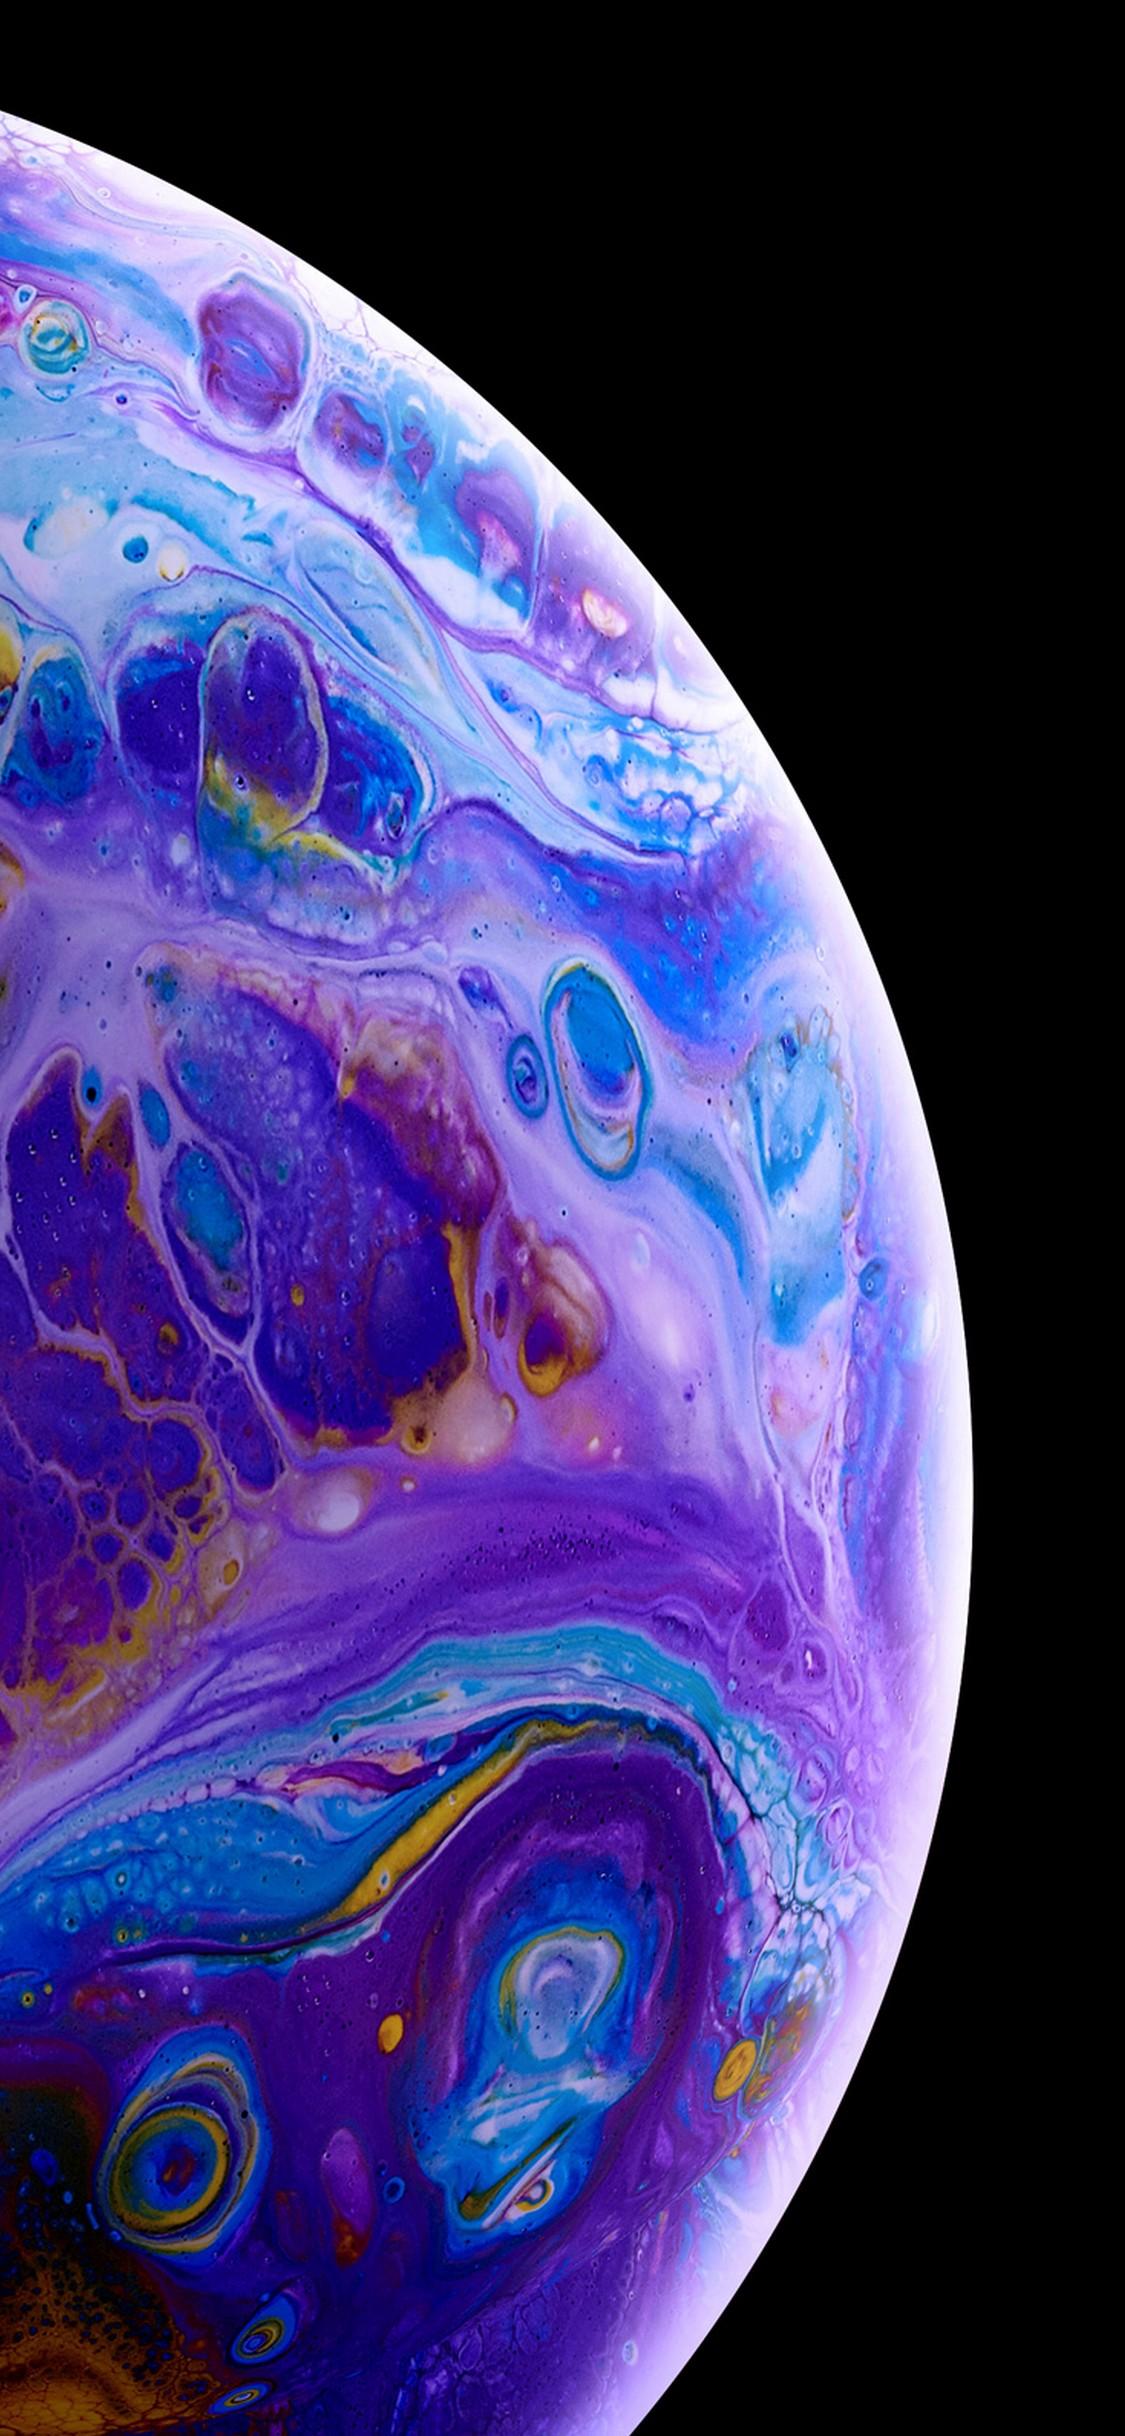 Iphone Xs Screen Wallpapers With High